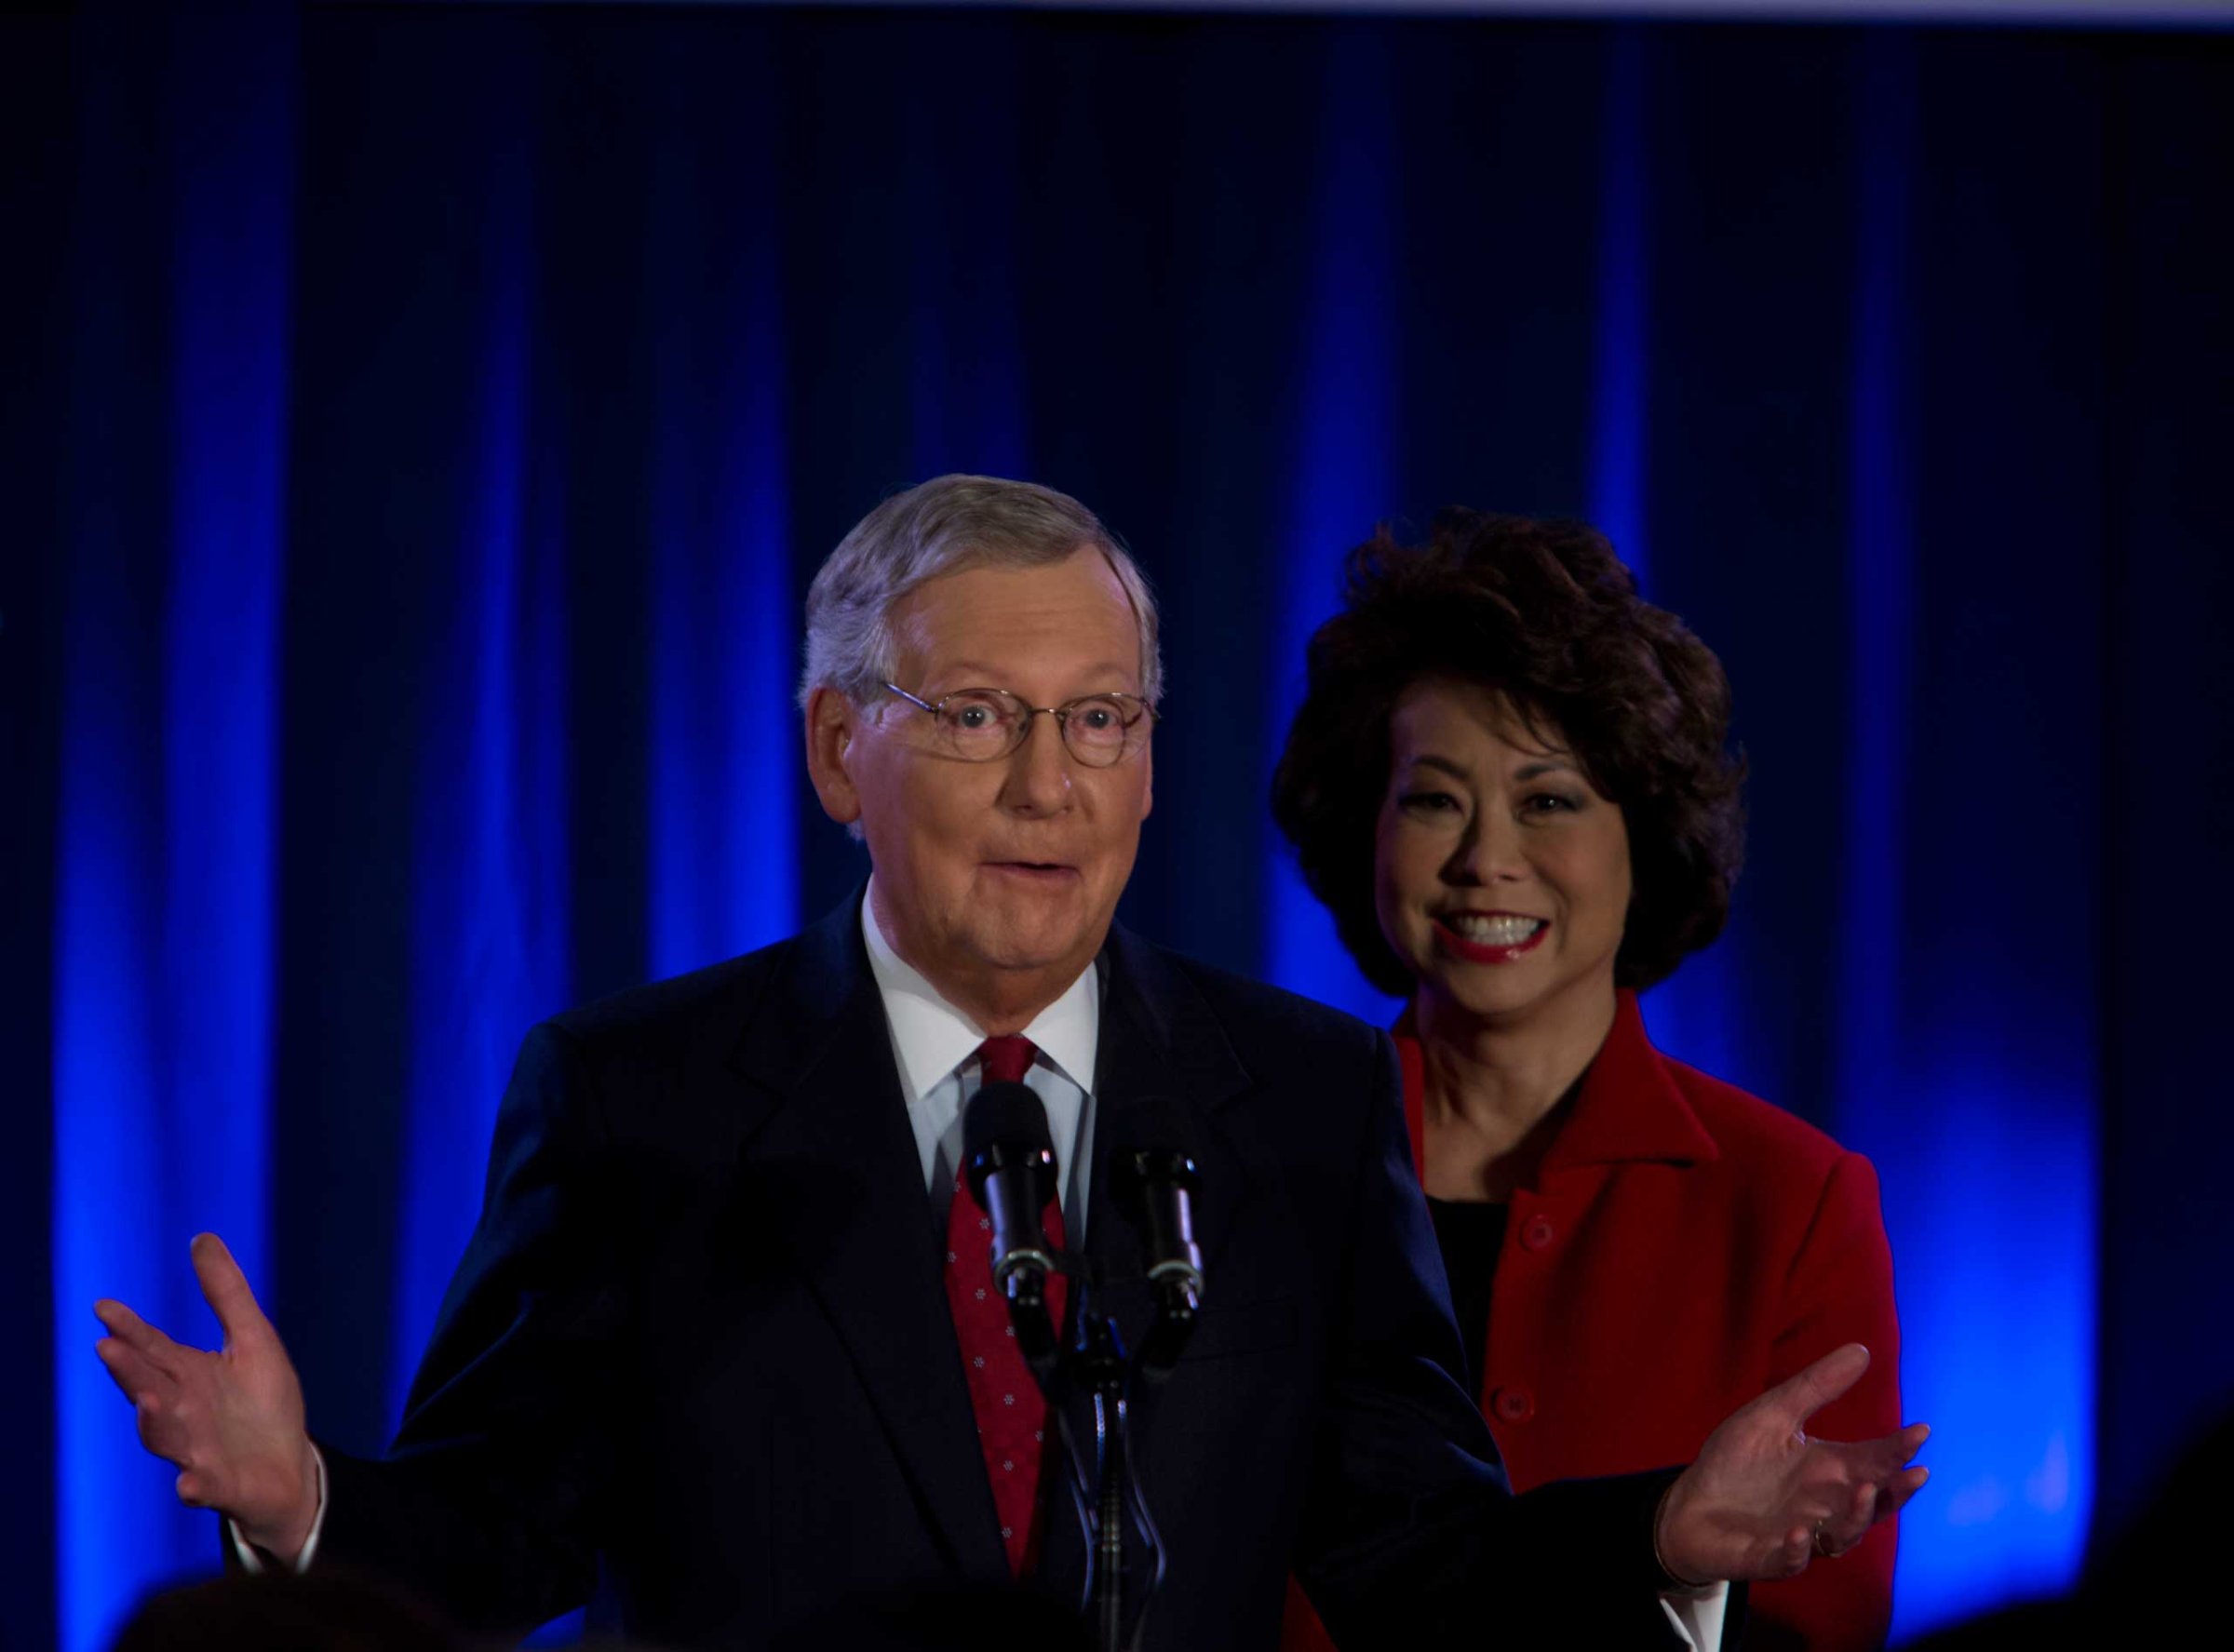 Election Night for Senator Mitch McConnell, the senior United States Senator from Kentucky. A member of the Republican Party, he has been the Minority Leader of the Senate since January 3, 2007.